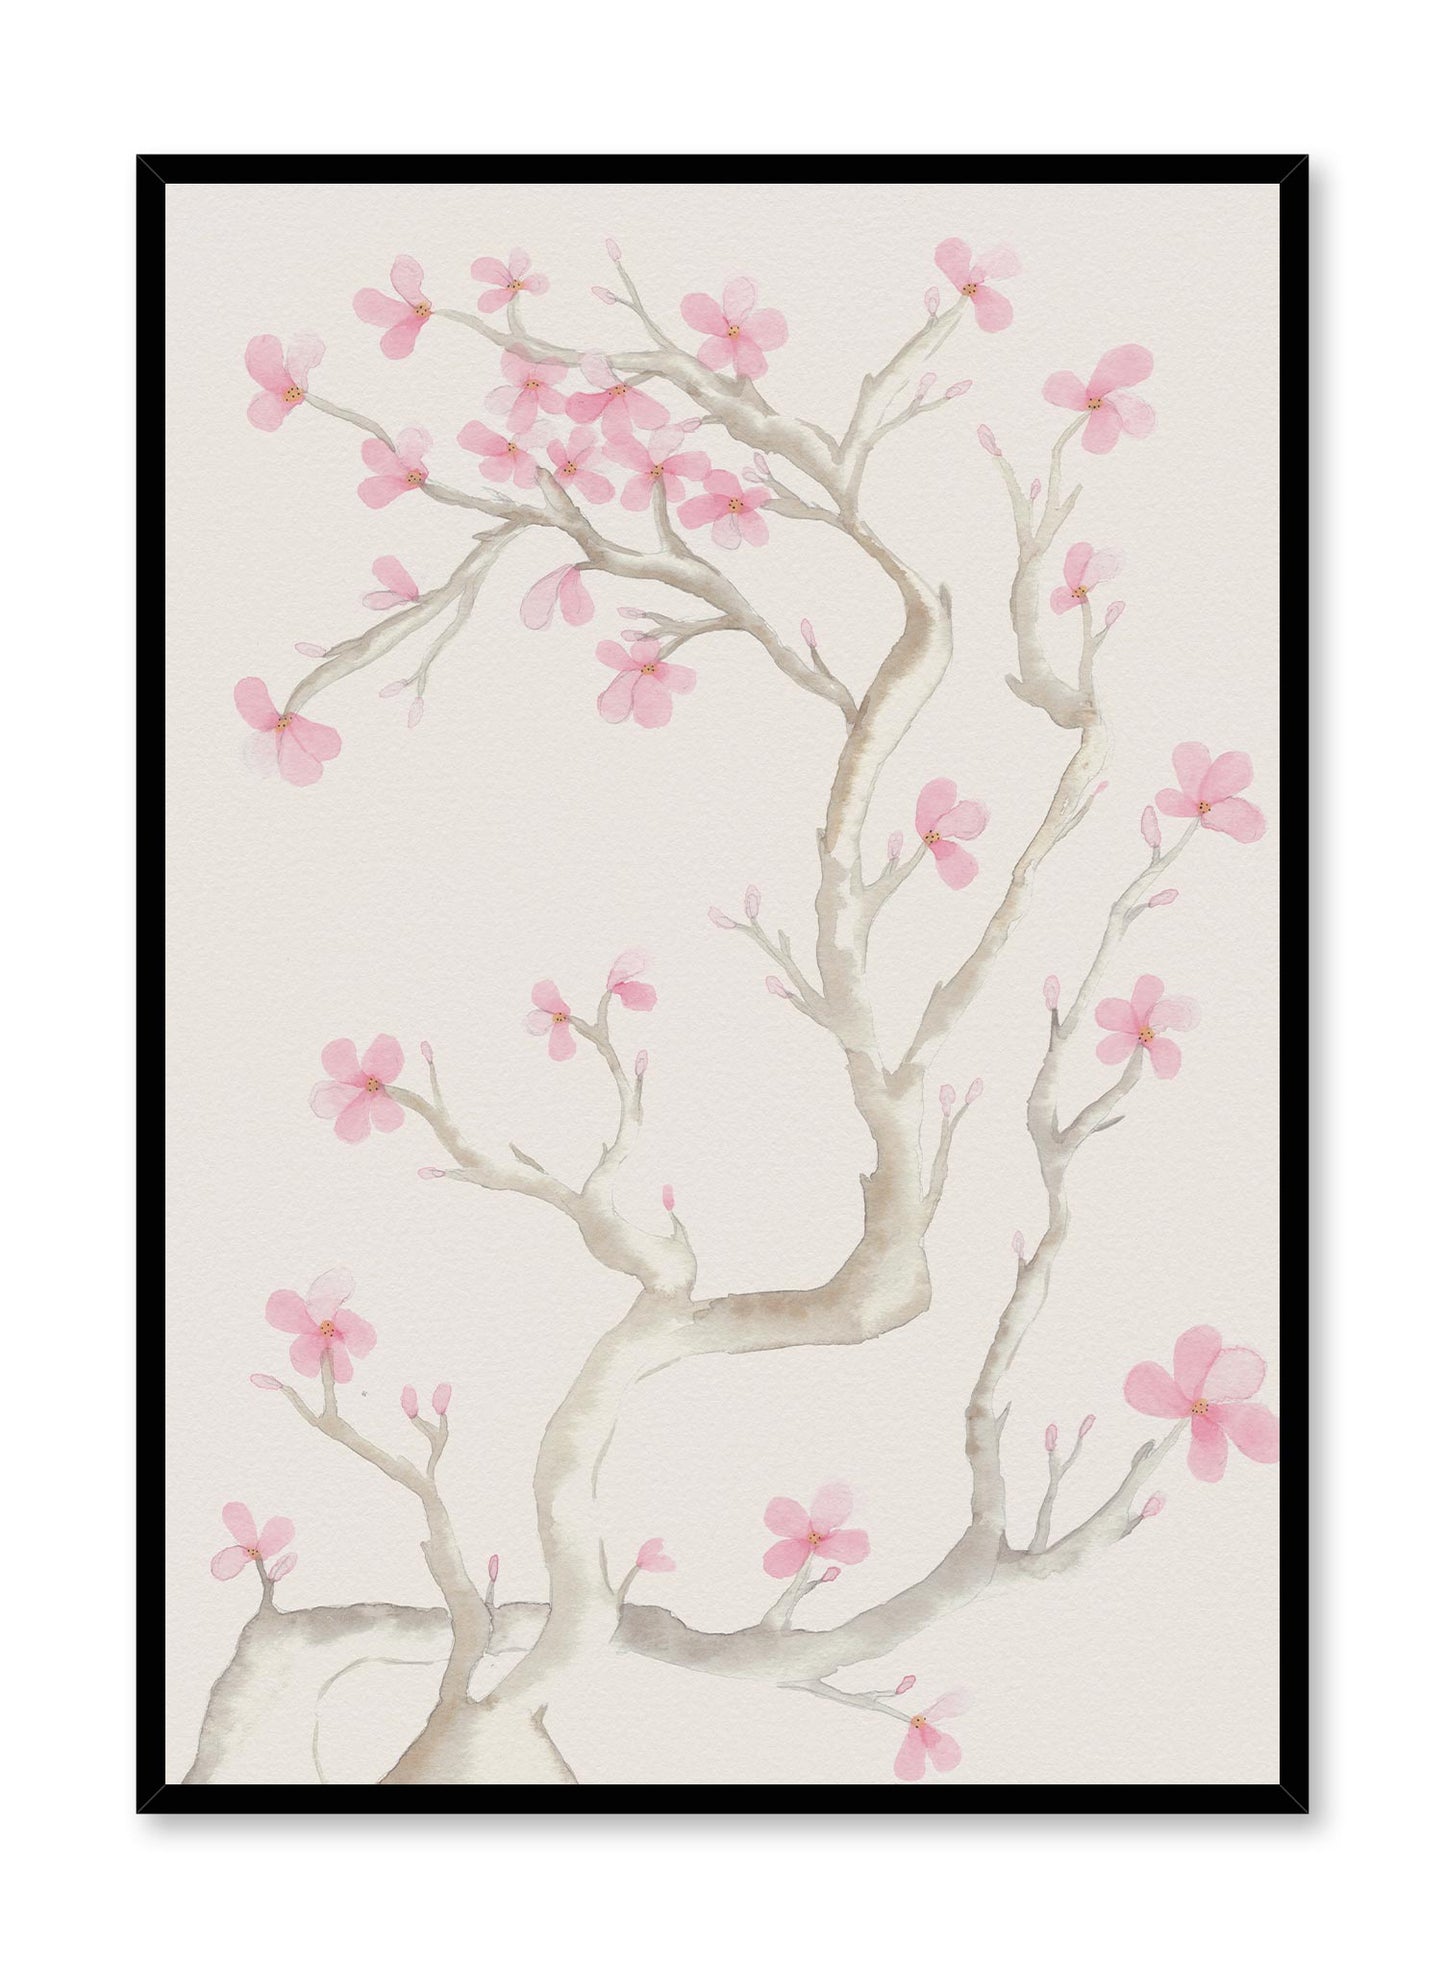 Sakura is minimalist illustration by Opposite Wall of branches of pink cherry blossom flowers.